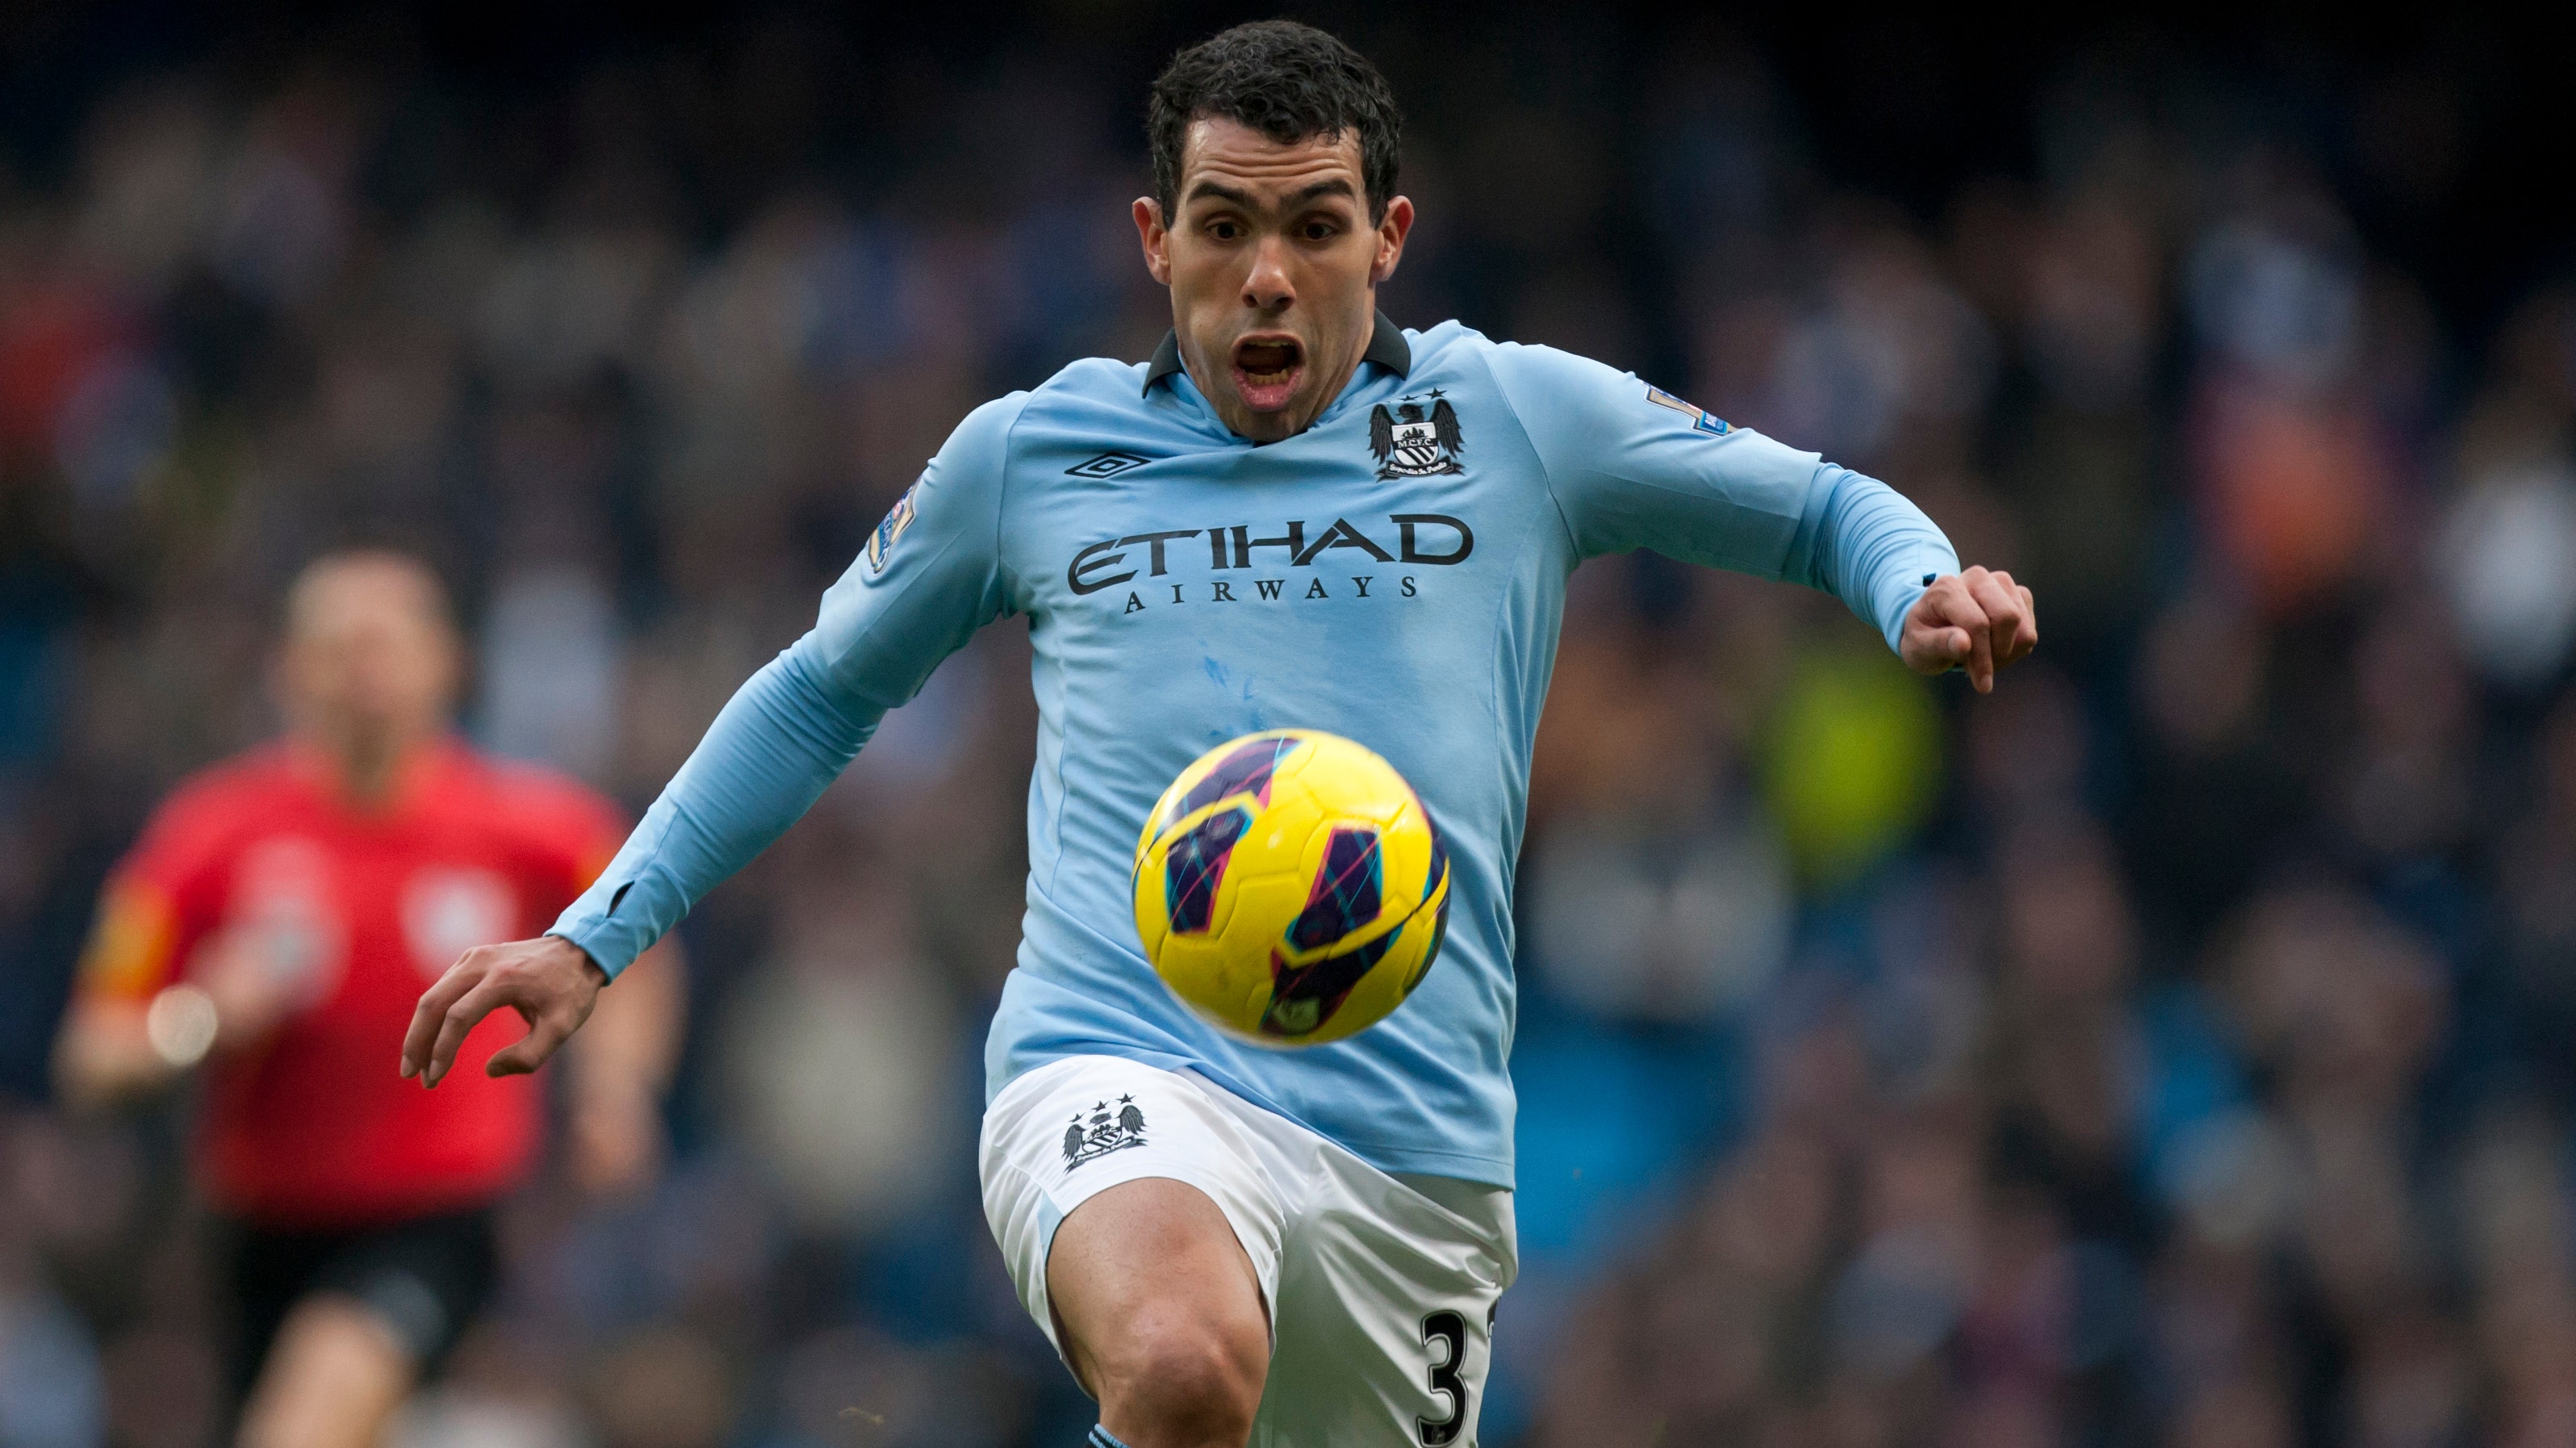 Soccer Carlos Tevez Leads Manchester City, Lionel Messi Resting Fox News pic image